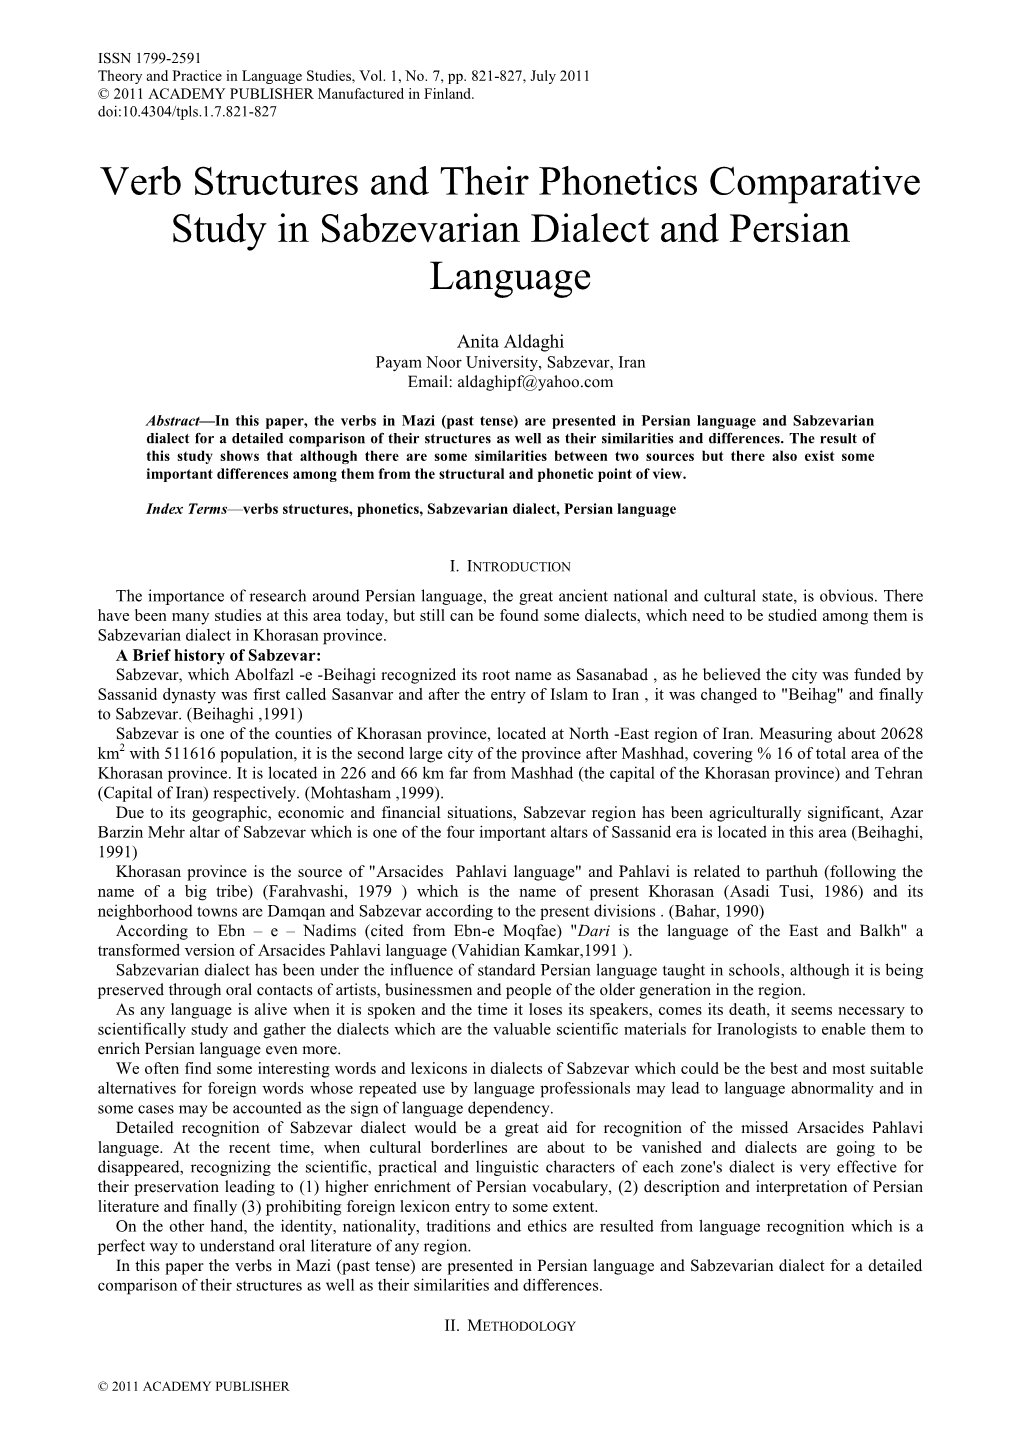 Verb Structures and Their Phonetics Comparative Study in Sabzevarian Dialect and Persian Language